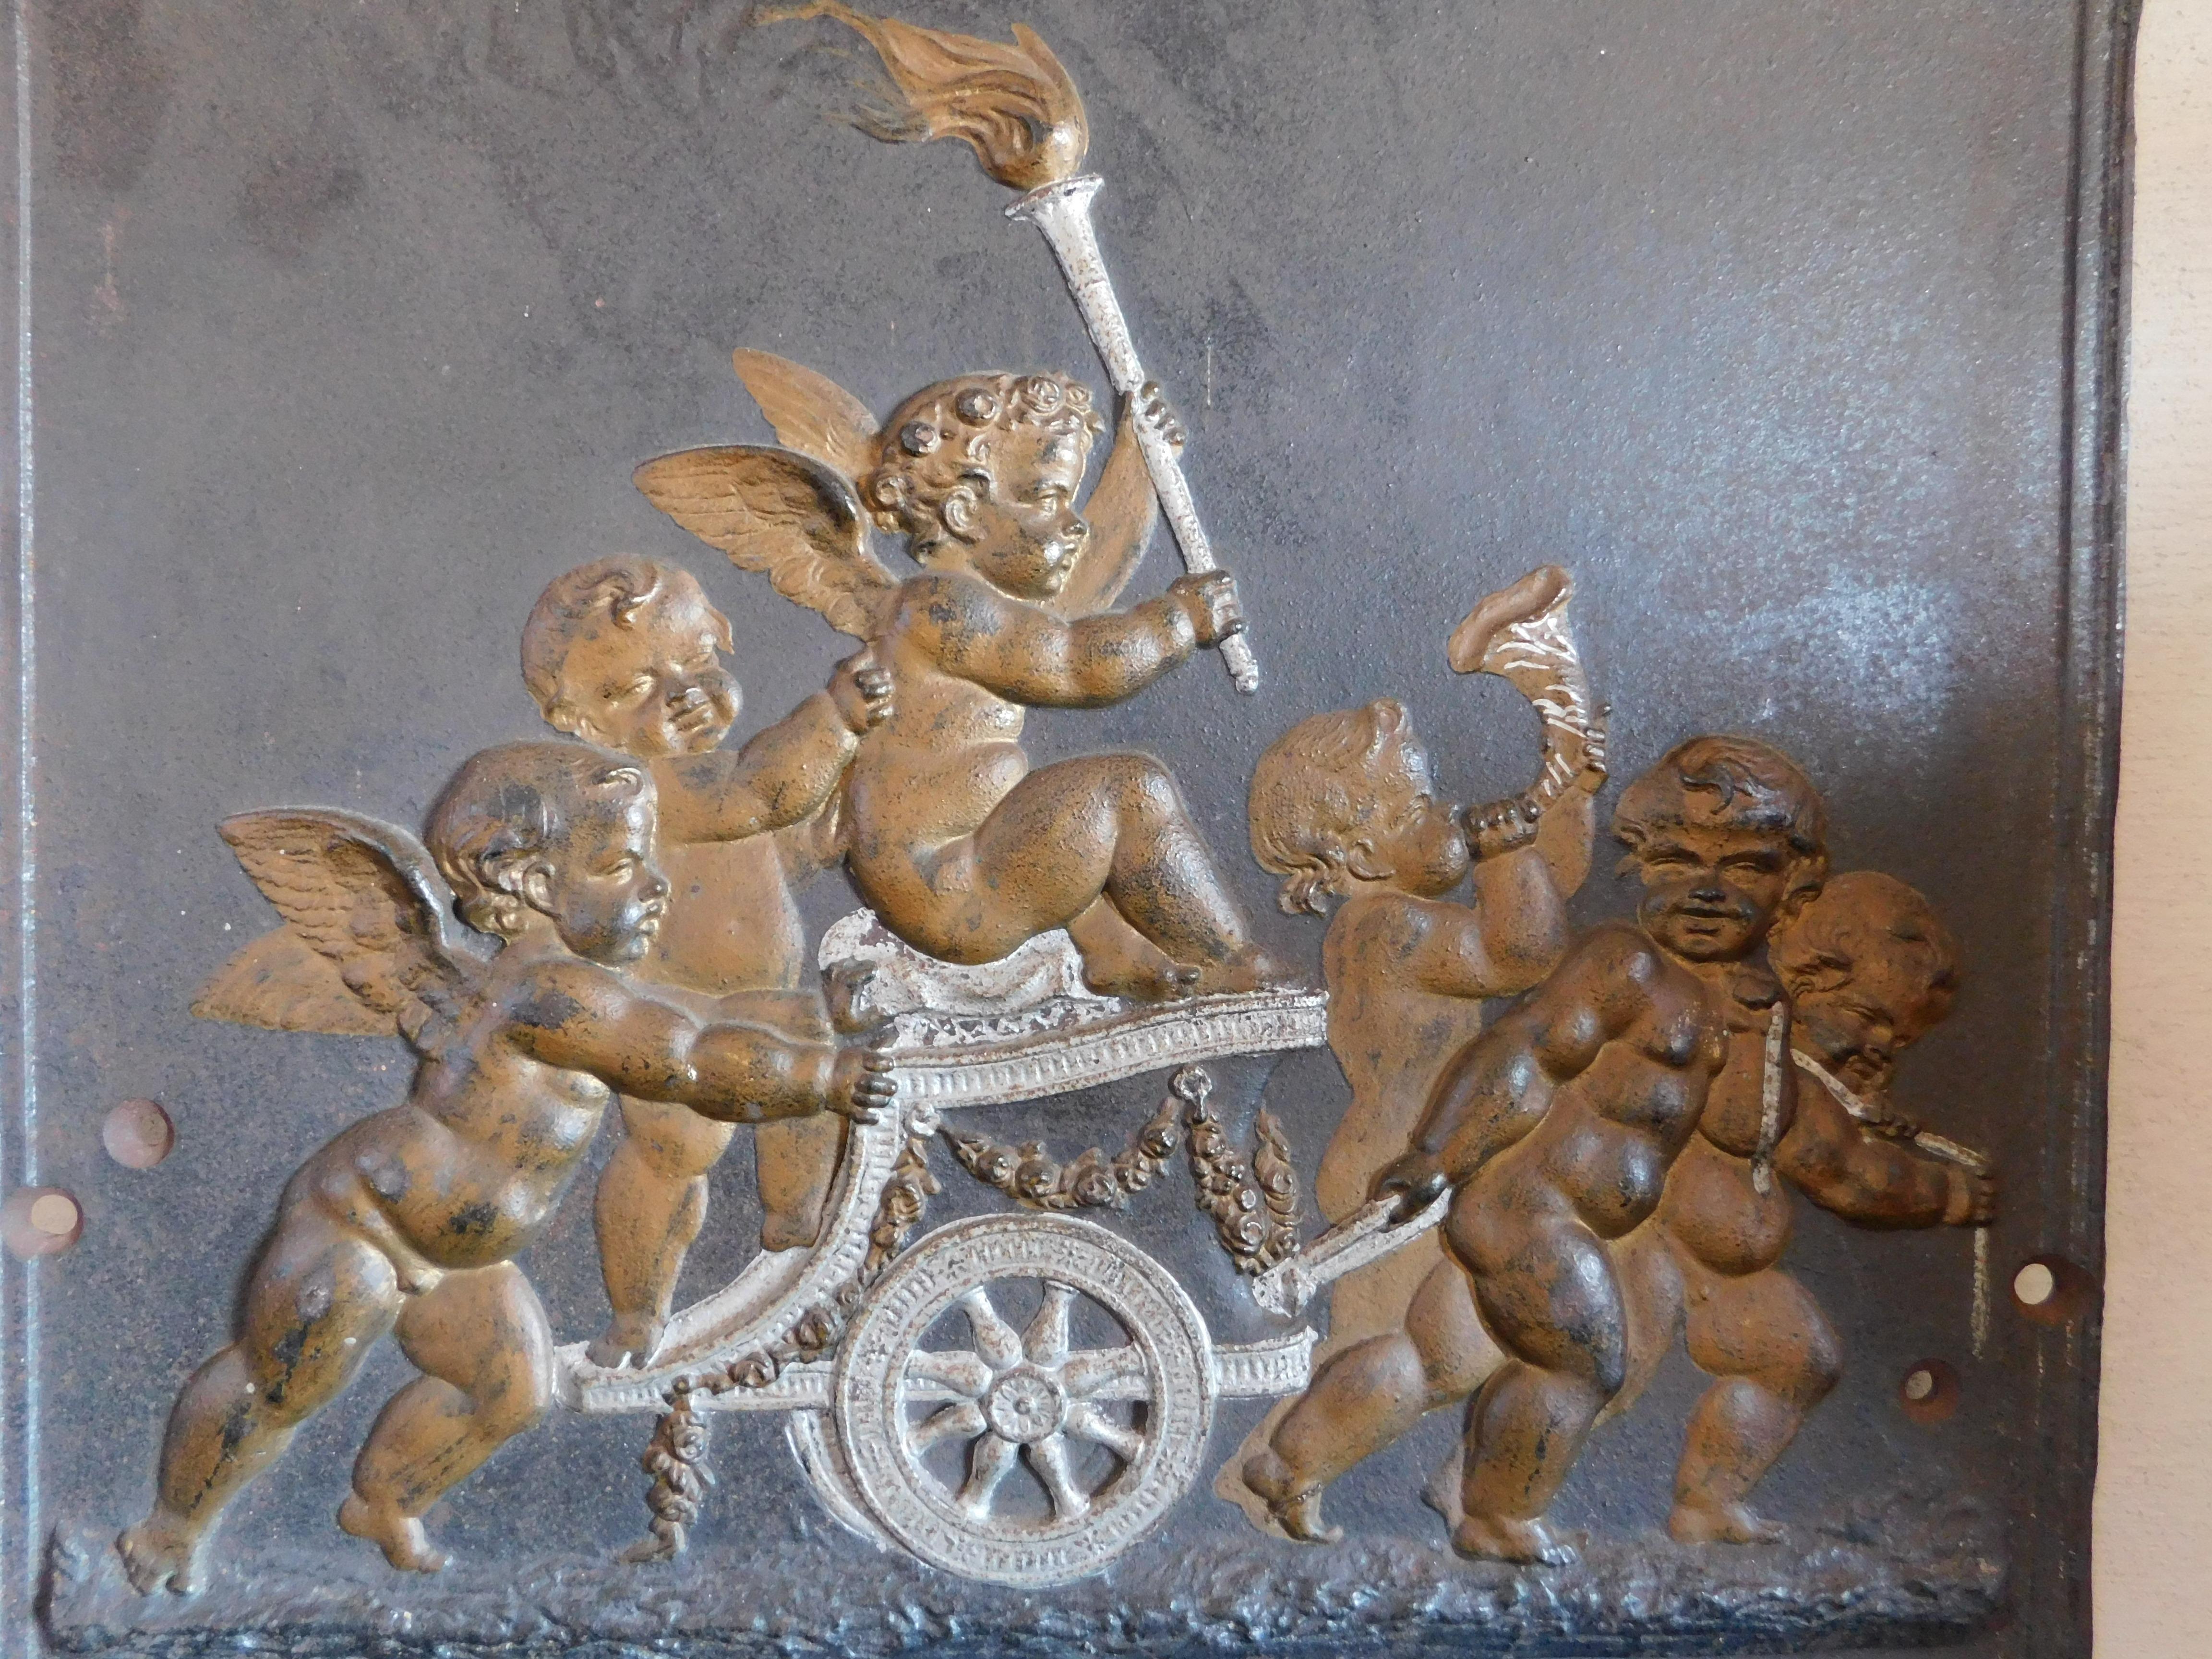 19th century French Napoleon III cast iron panel depicting cherubs on a chariot.
Beautiful clear casting in very good condition.